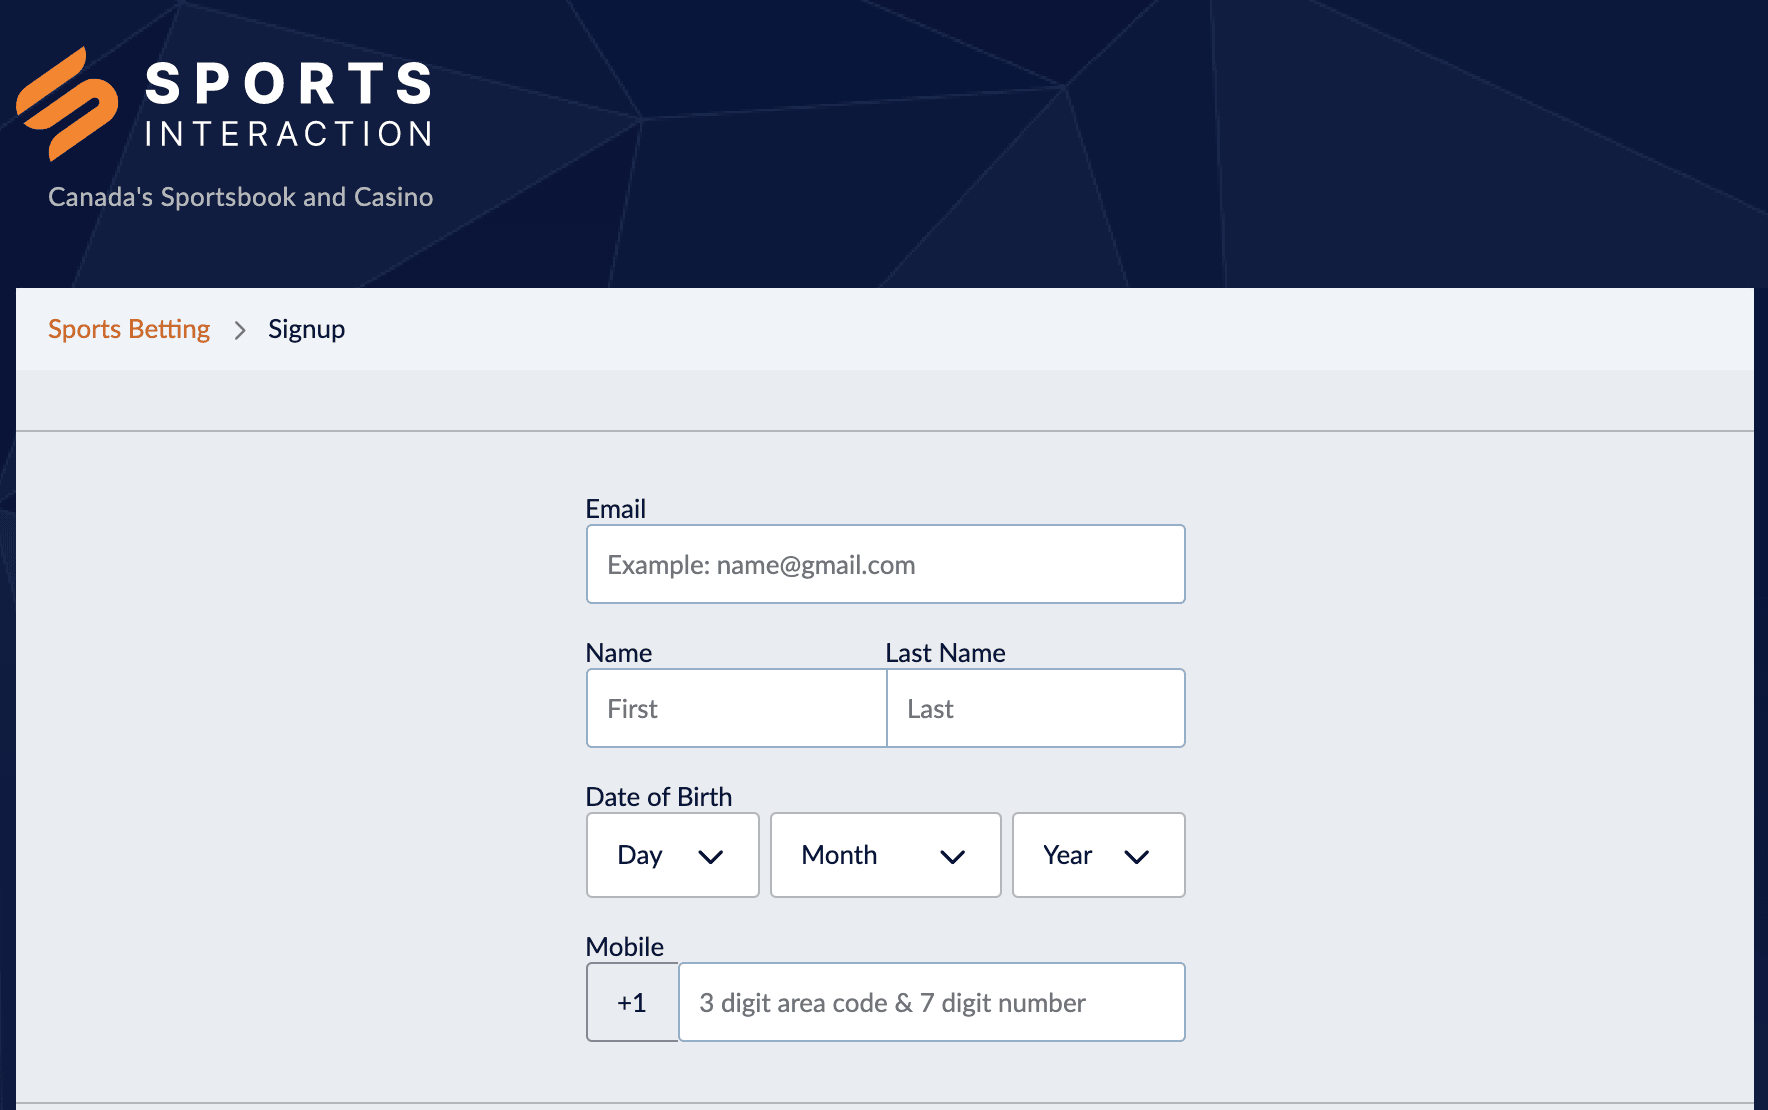 Sports Interaction Signup